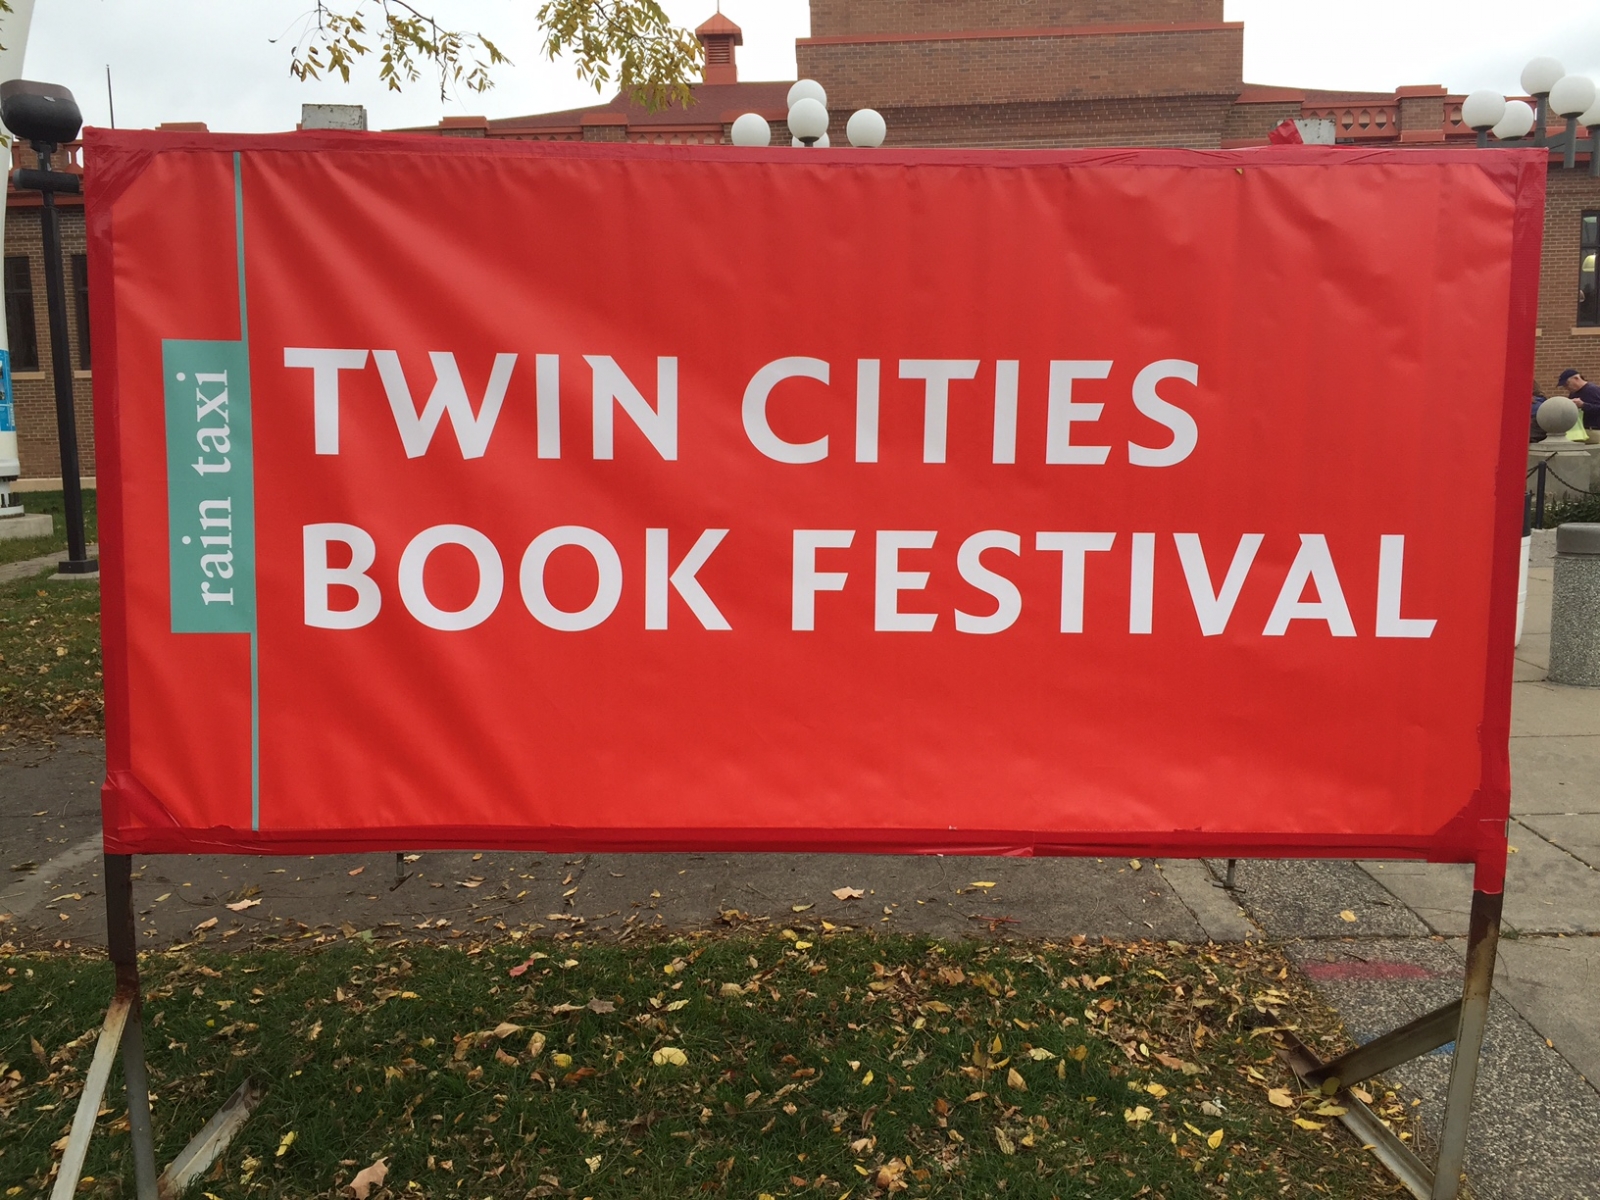 twin cities book festival, minnesota, st. paul, events, state fair, books, literature, local authors, local books, events, festivals